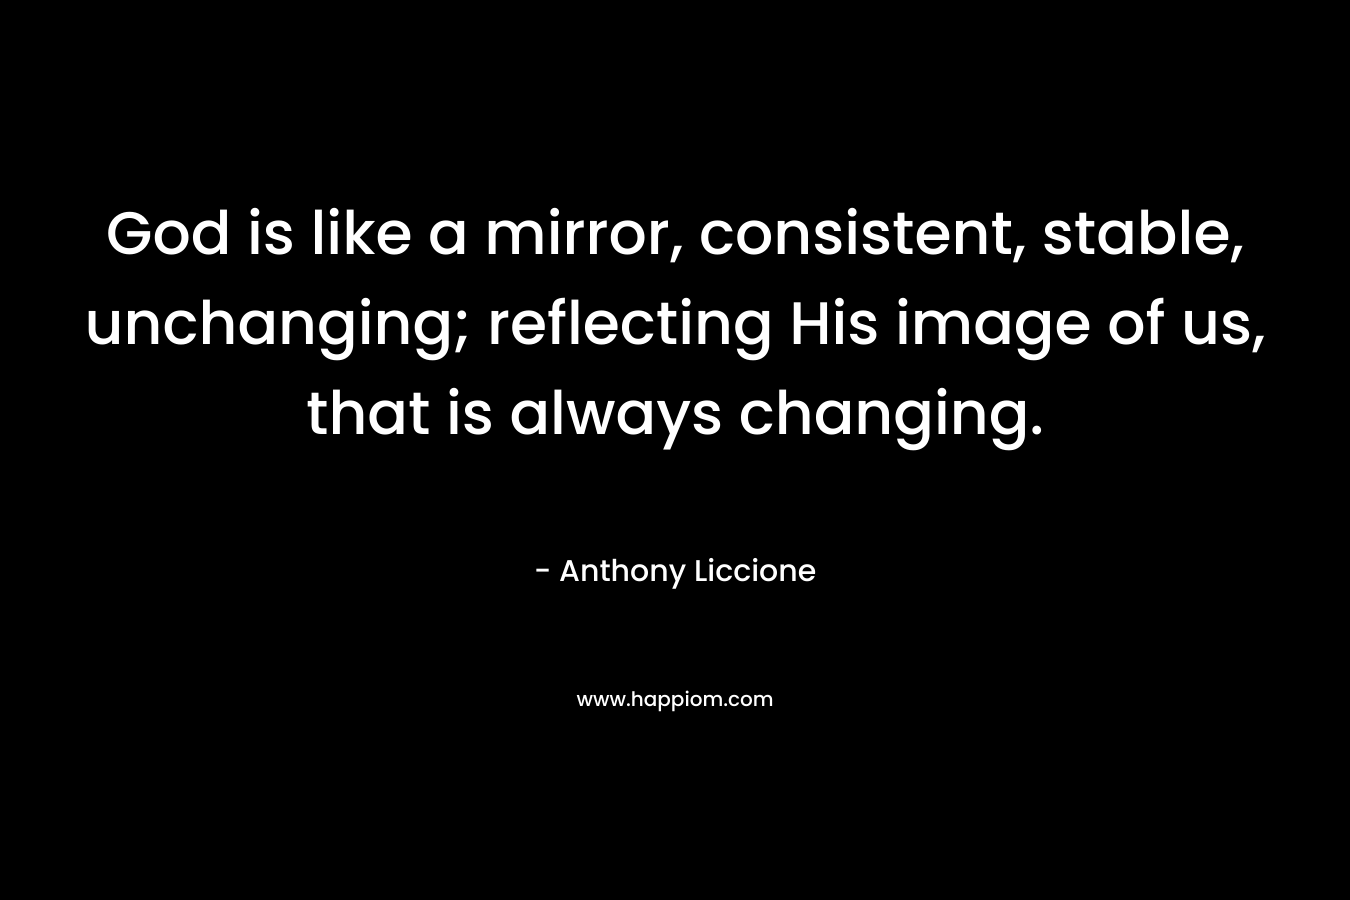 God is like a mirror, consistent, stable, unchanging; reflecting His image of us, that is always changing. – Anthony Liccione